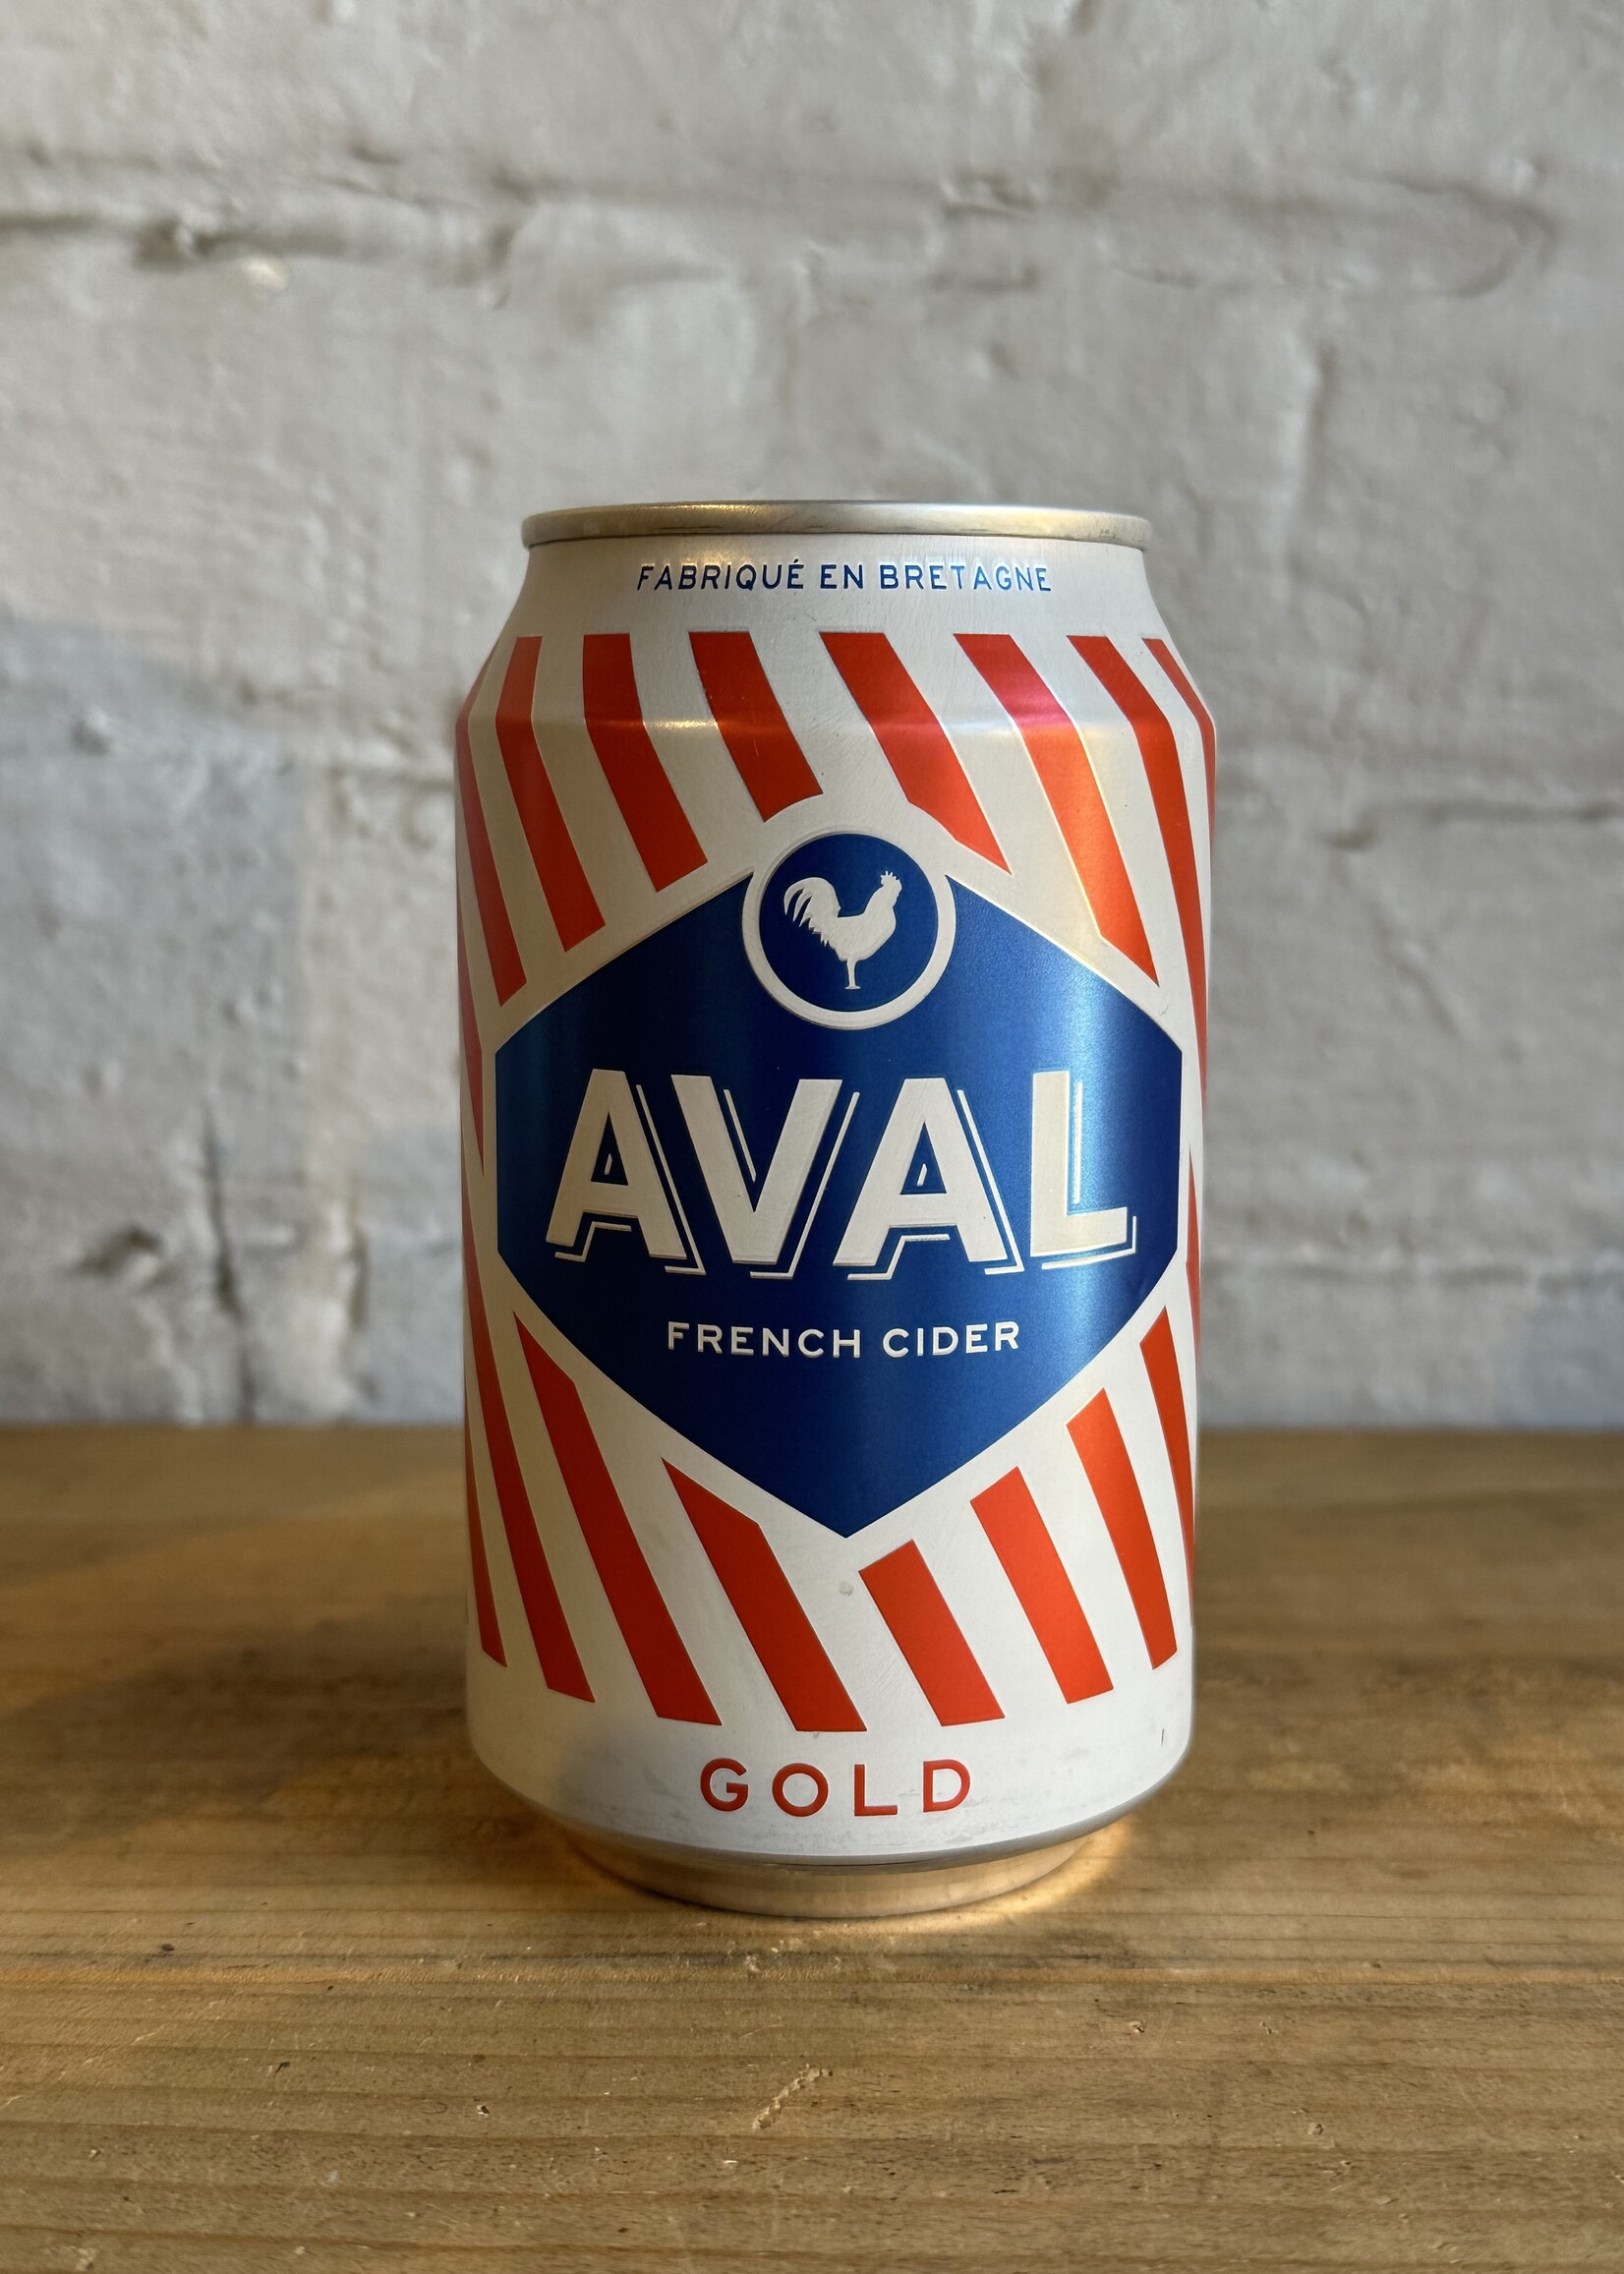 Wine Aval Gold Artisanal Cider - Brittany, France (330ml can)